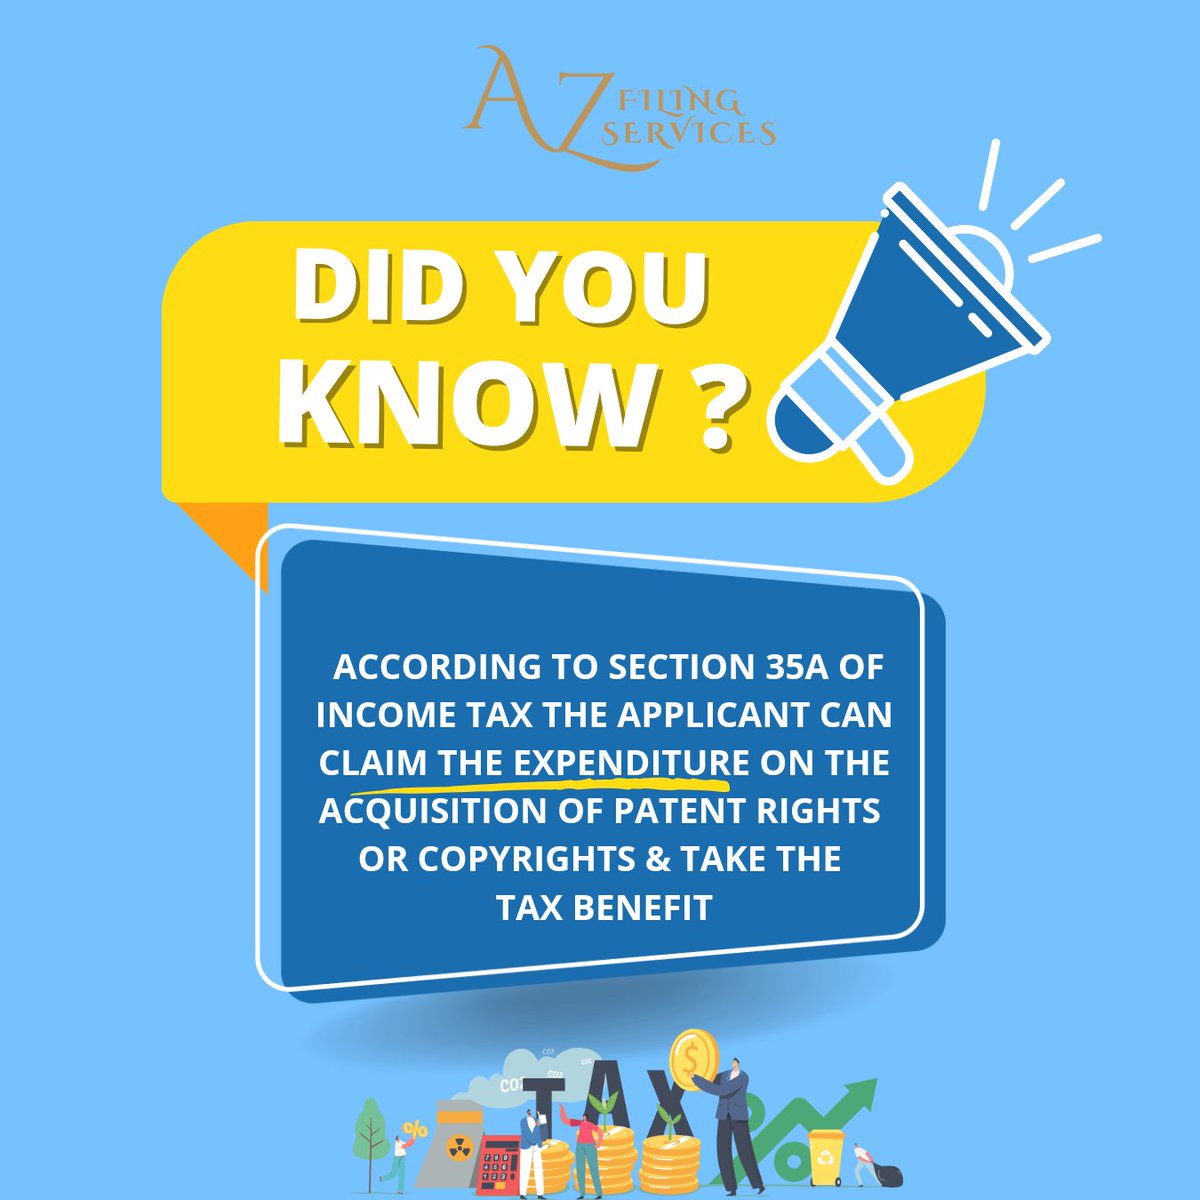 A2Z Filing Services
Did you know that?
.
.
Need Filing & Registration Services..DM now↗️
#a2zfilingservices #Registration #Tax #didyouknow #finance #newbusiness #business #bussinessowner #businessservices #services #trademark #startupbusiness